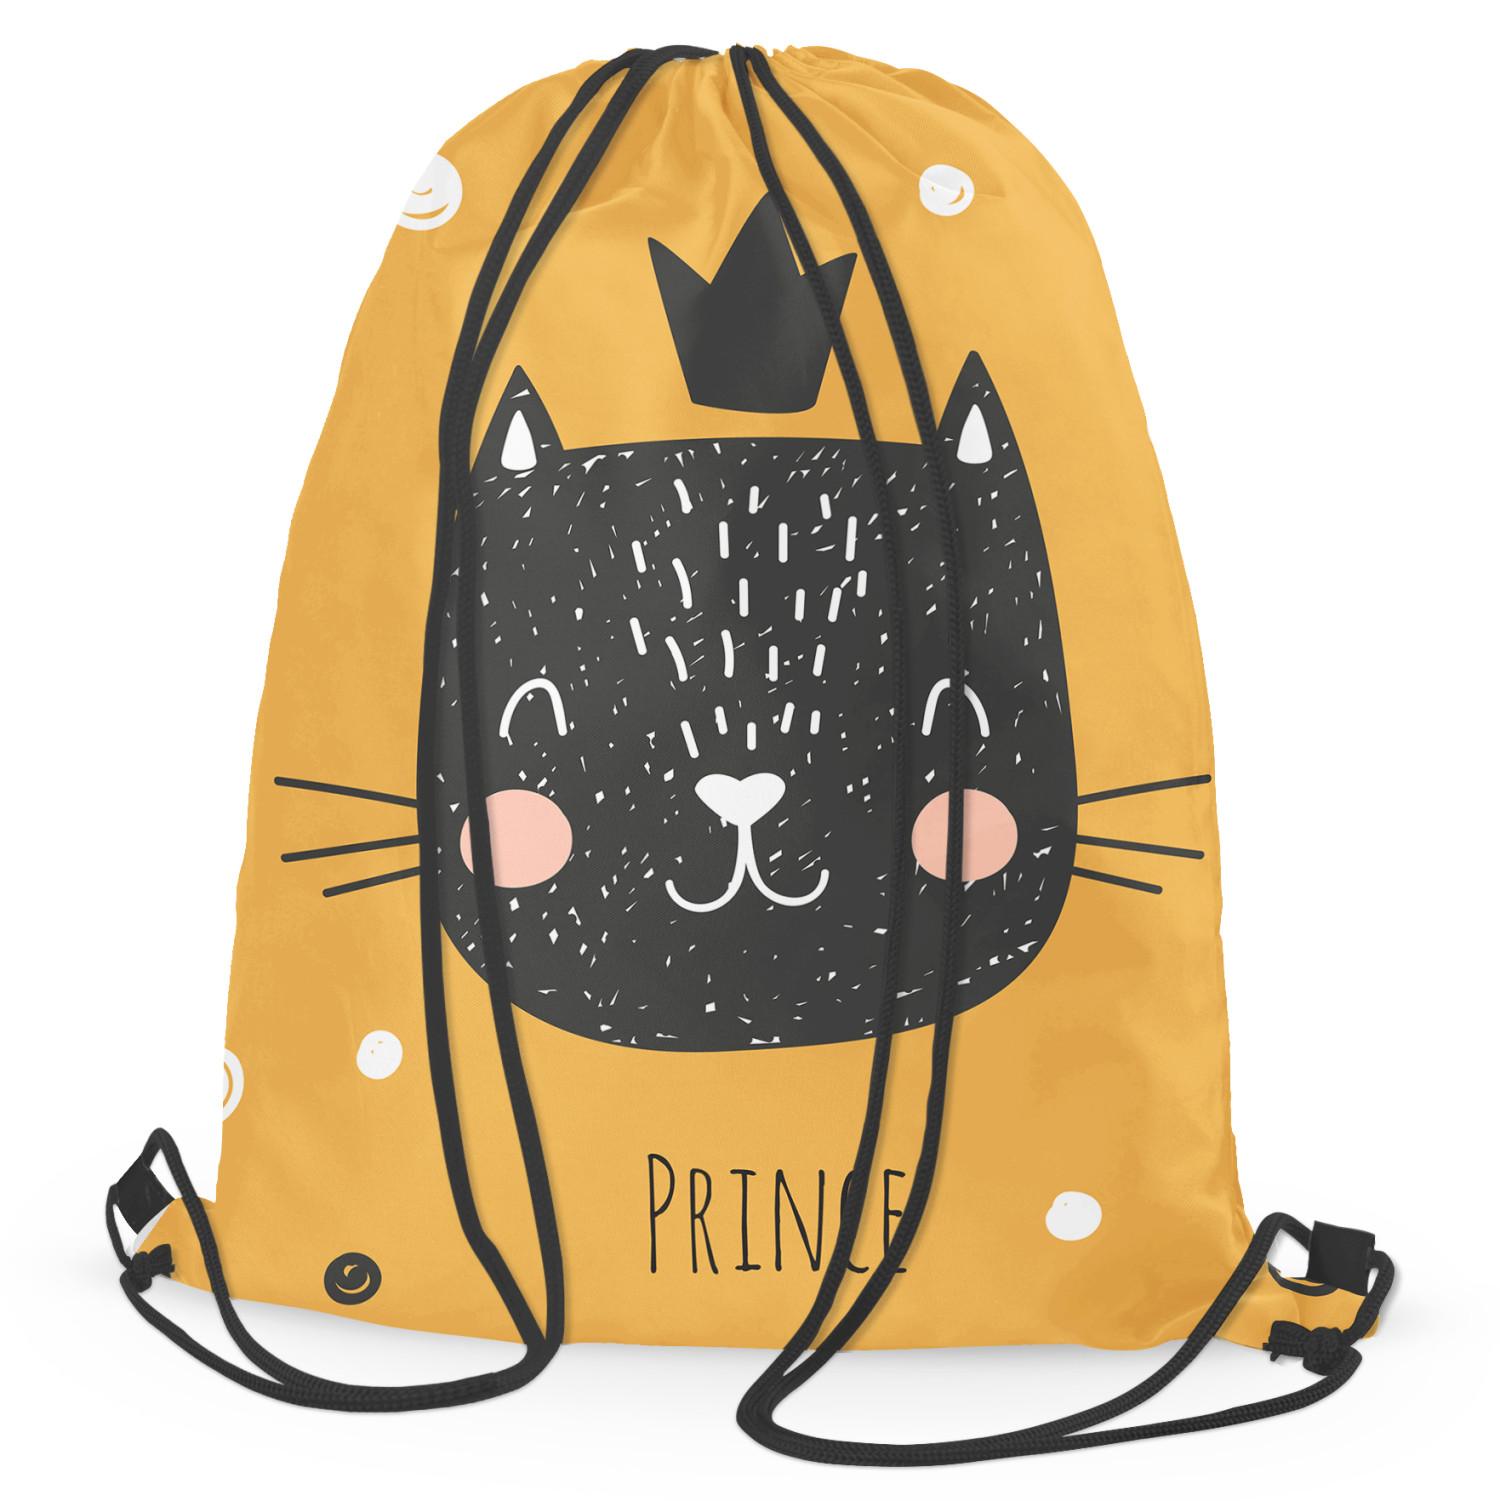 Backpack Cat prince - composition with elements in shades of white and black